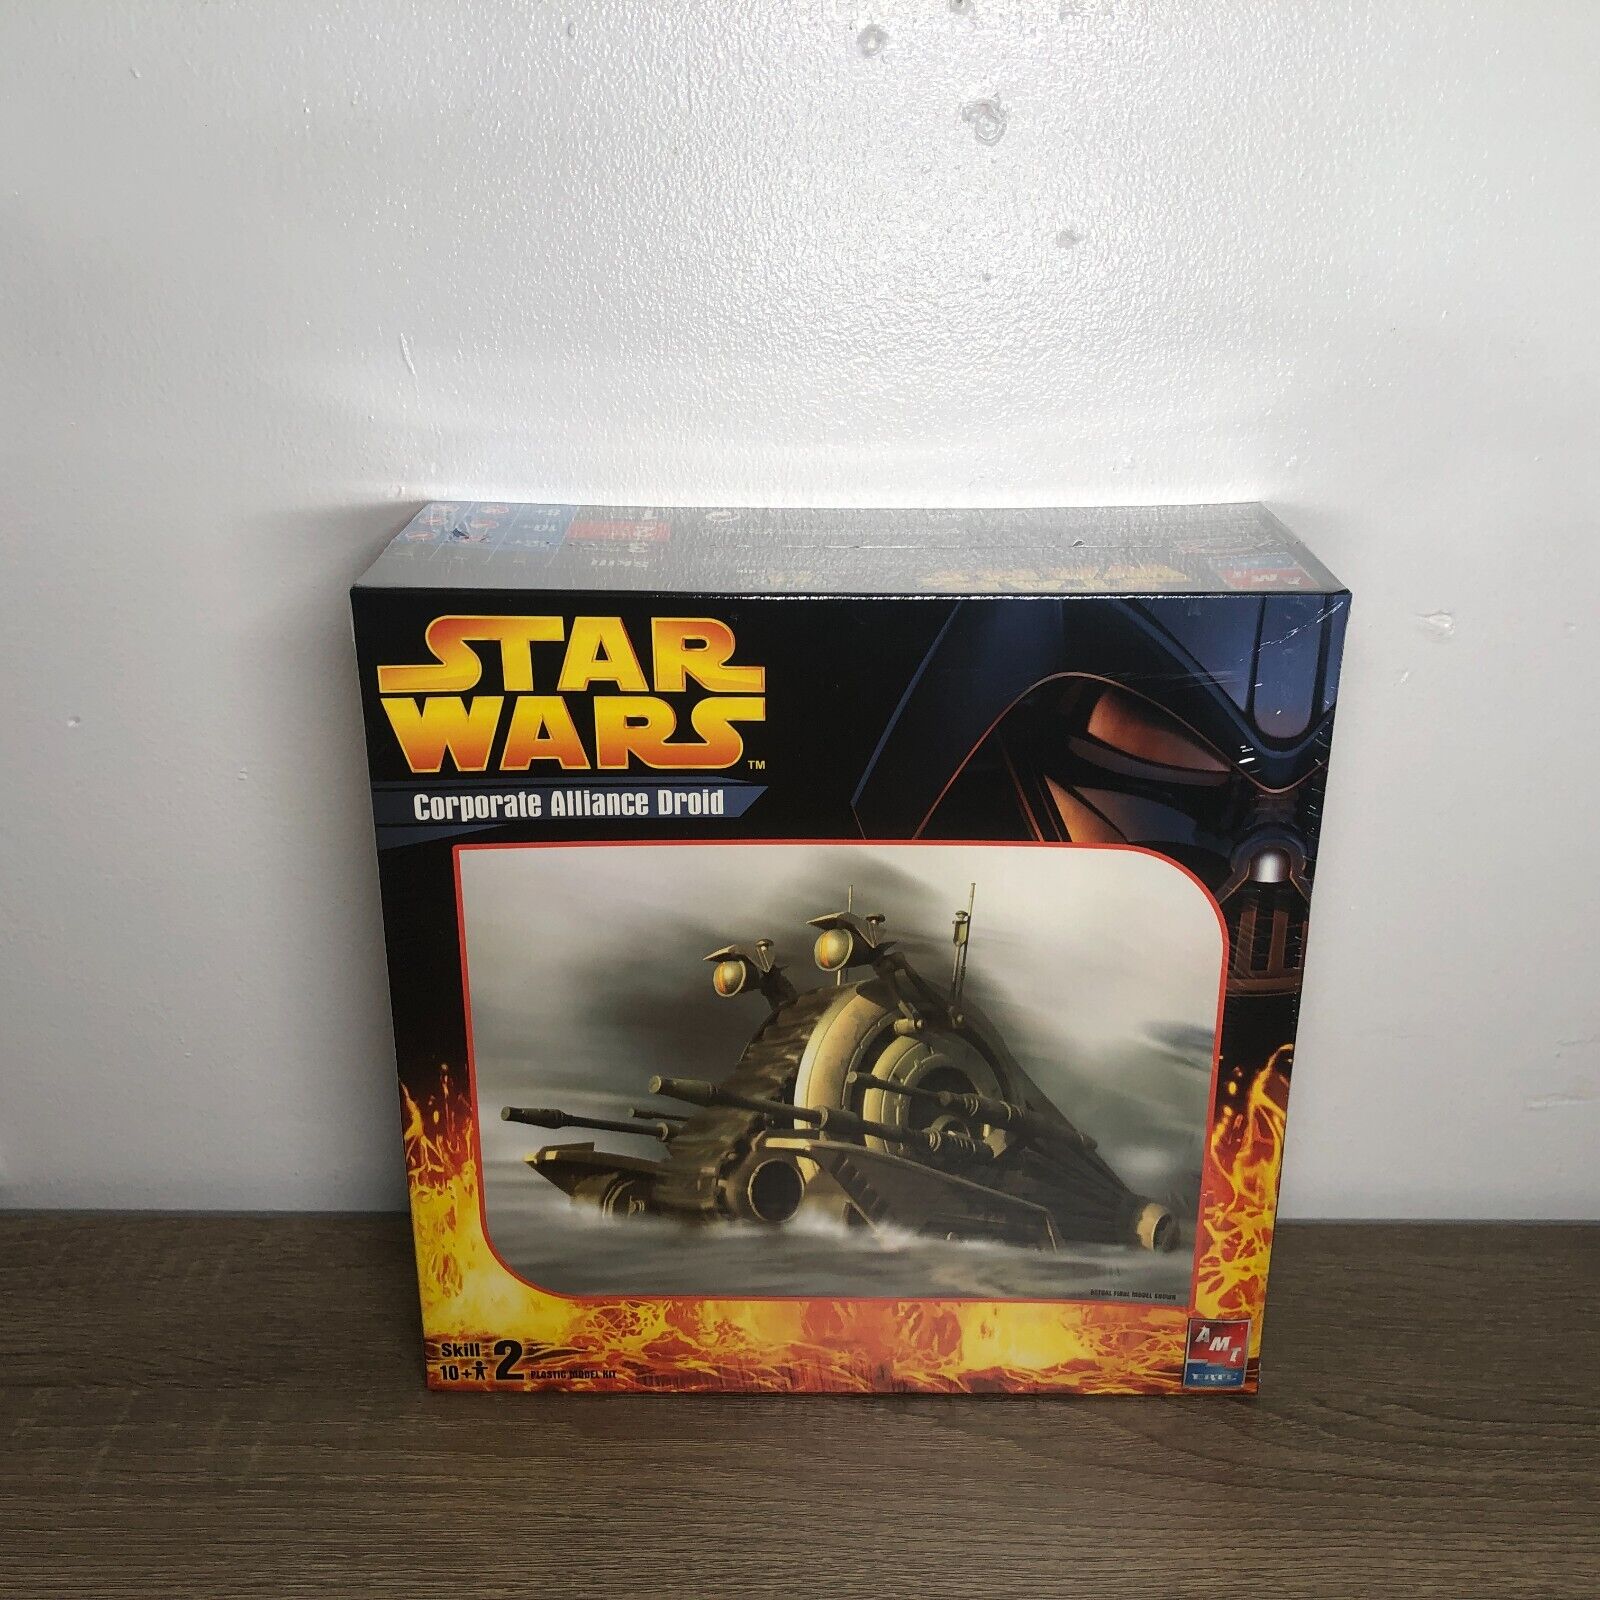 Star Wars Corporate Alliance Droid Model Kit Space Ship AMT ERTL RC2 Sealed 2005